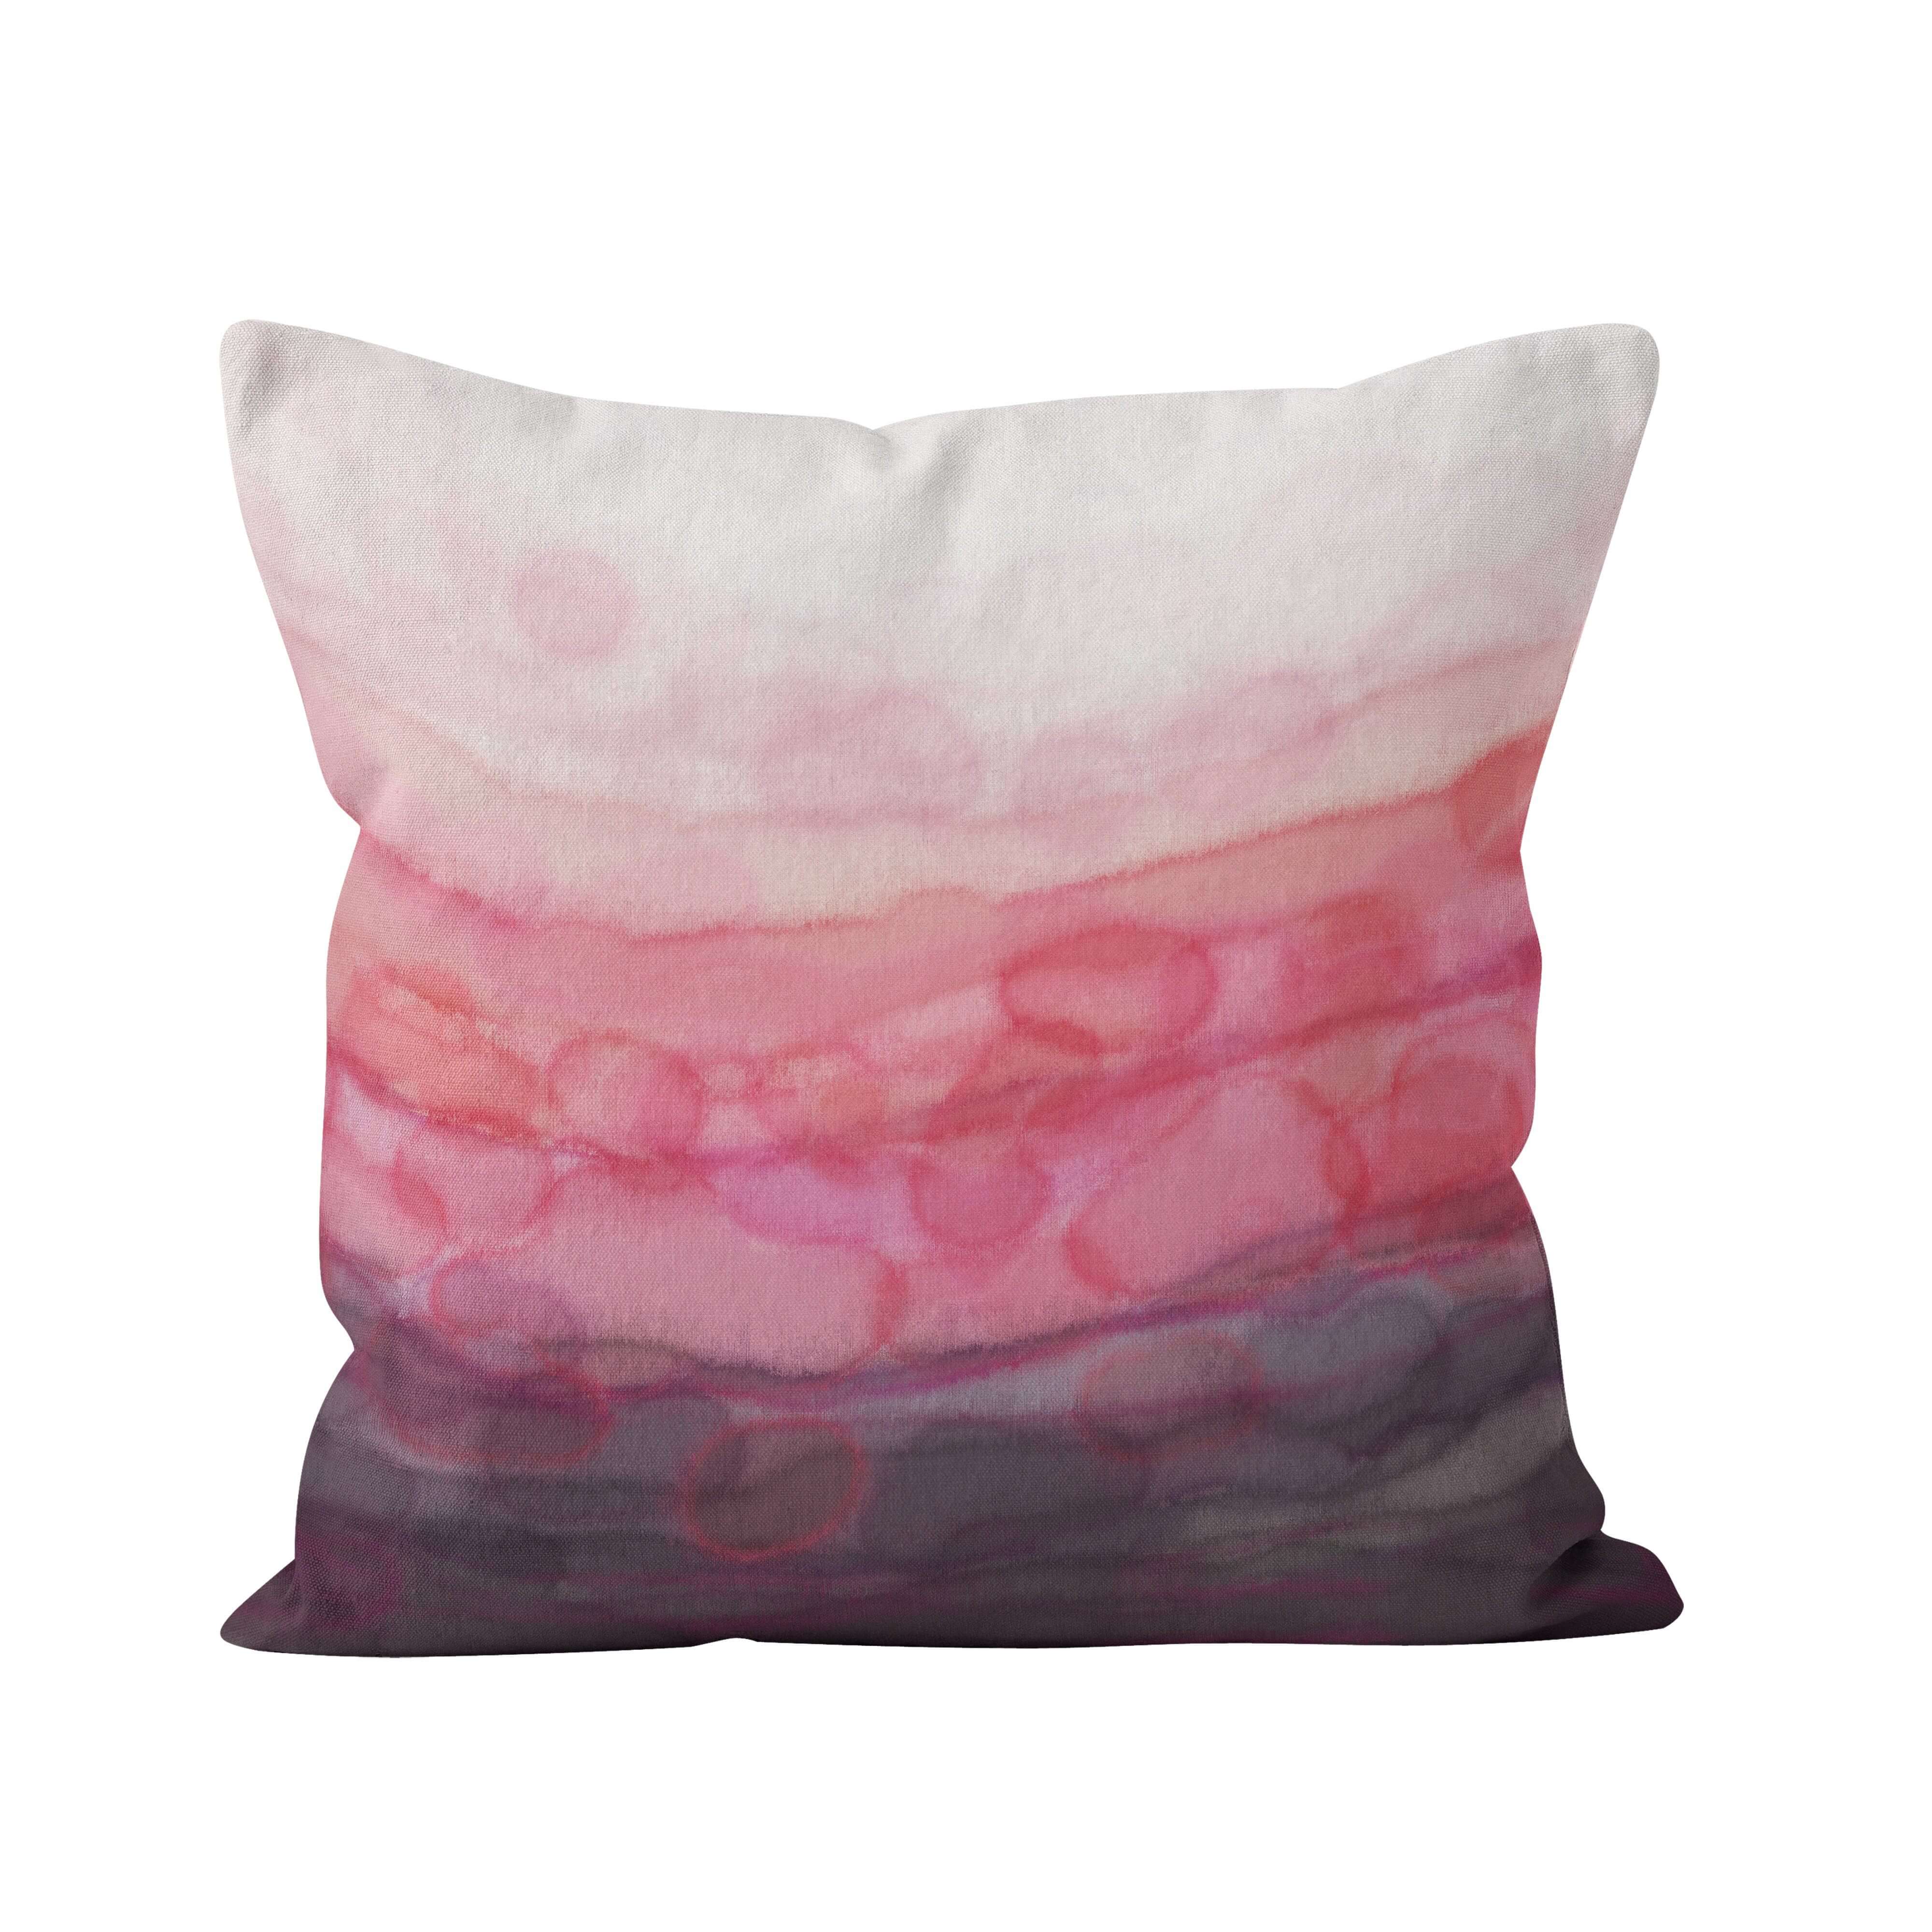 'Serenity' Pink Cushion - Louise Mead